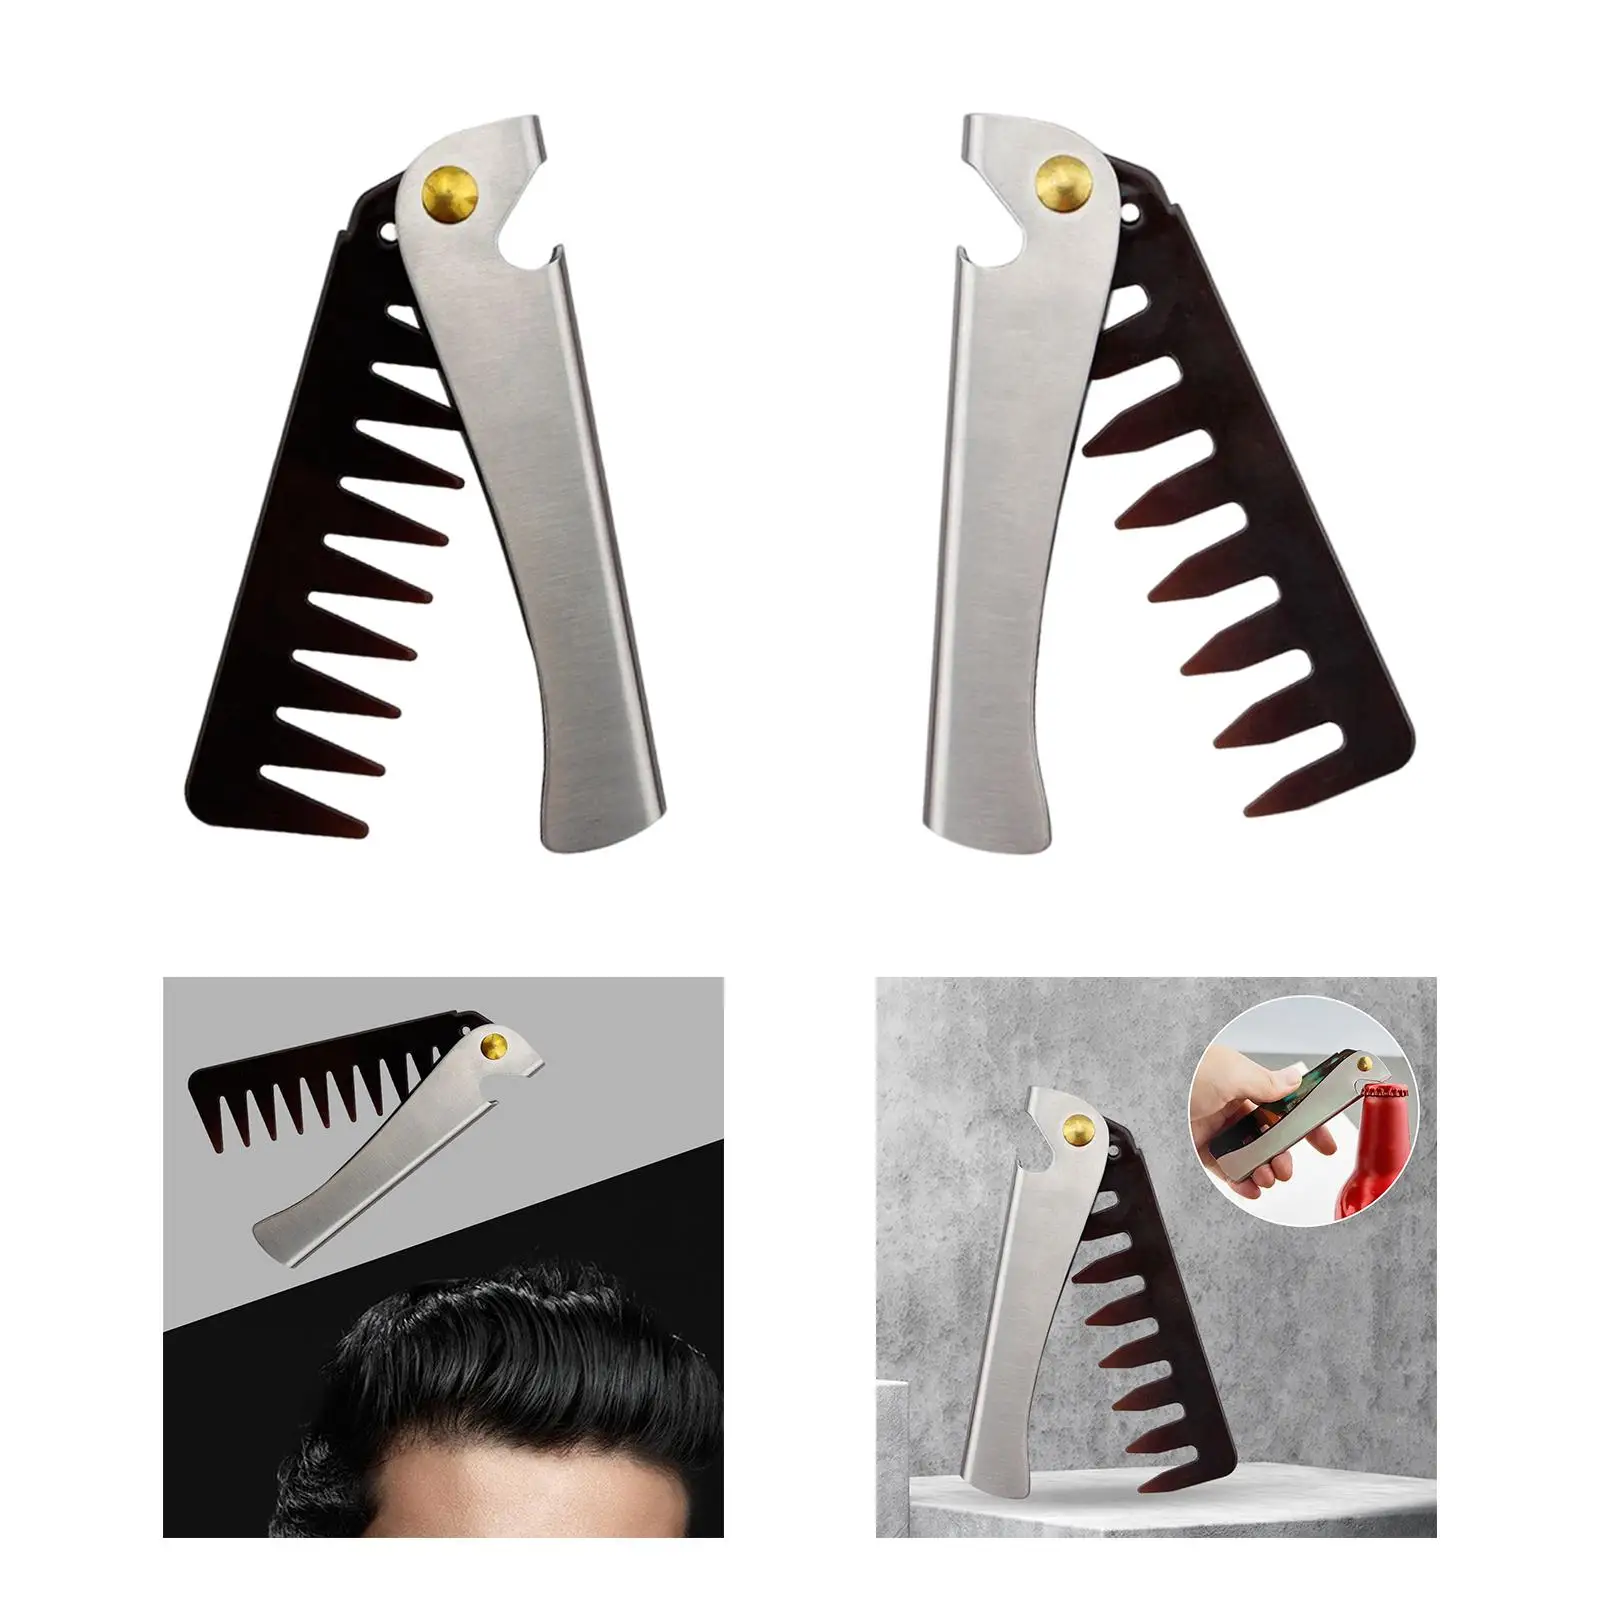 Portable Folding Beard Comb for Men Grooming Styling Hair or Mustache Retro Oil Head Comb for Stylists Beauty Salon Home Use